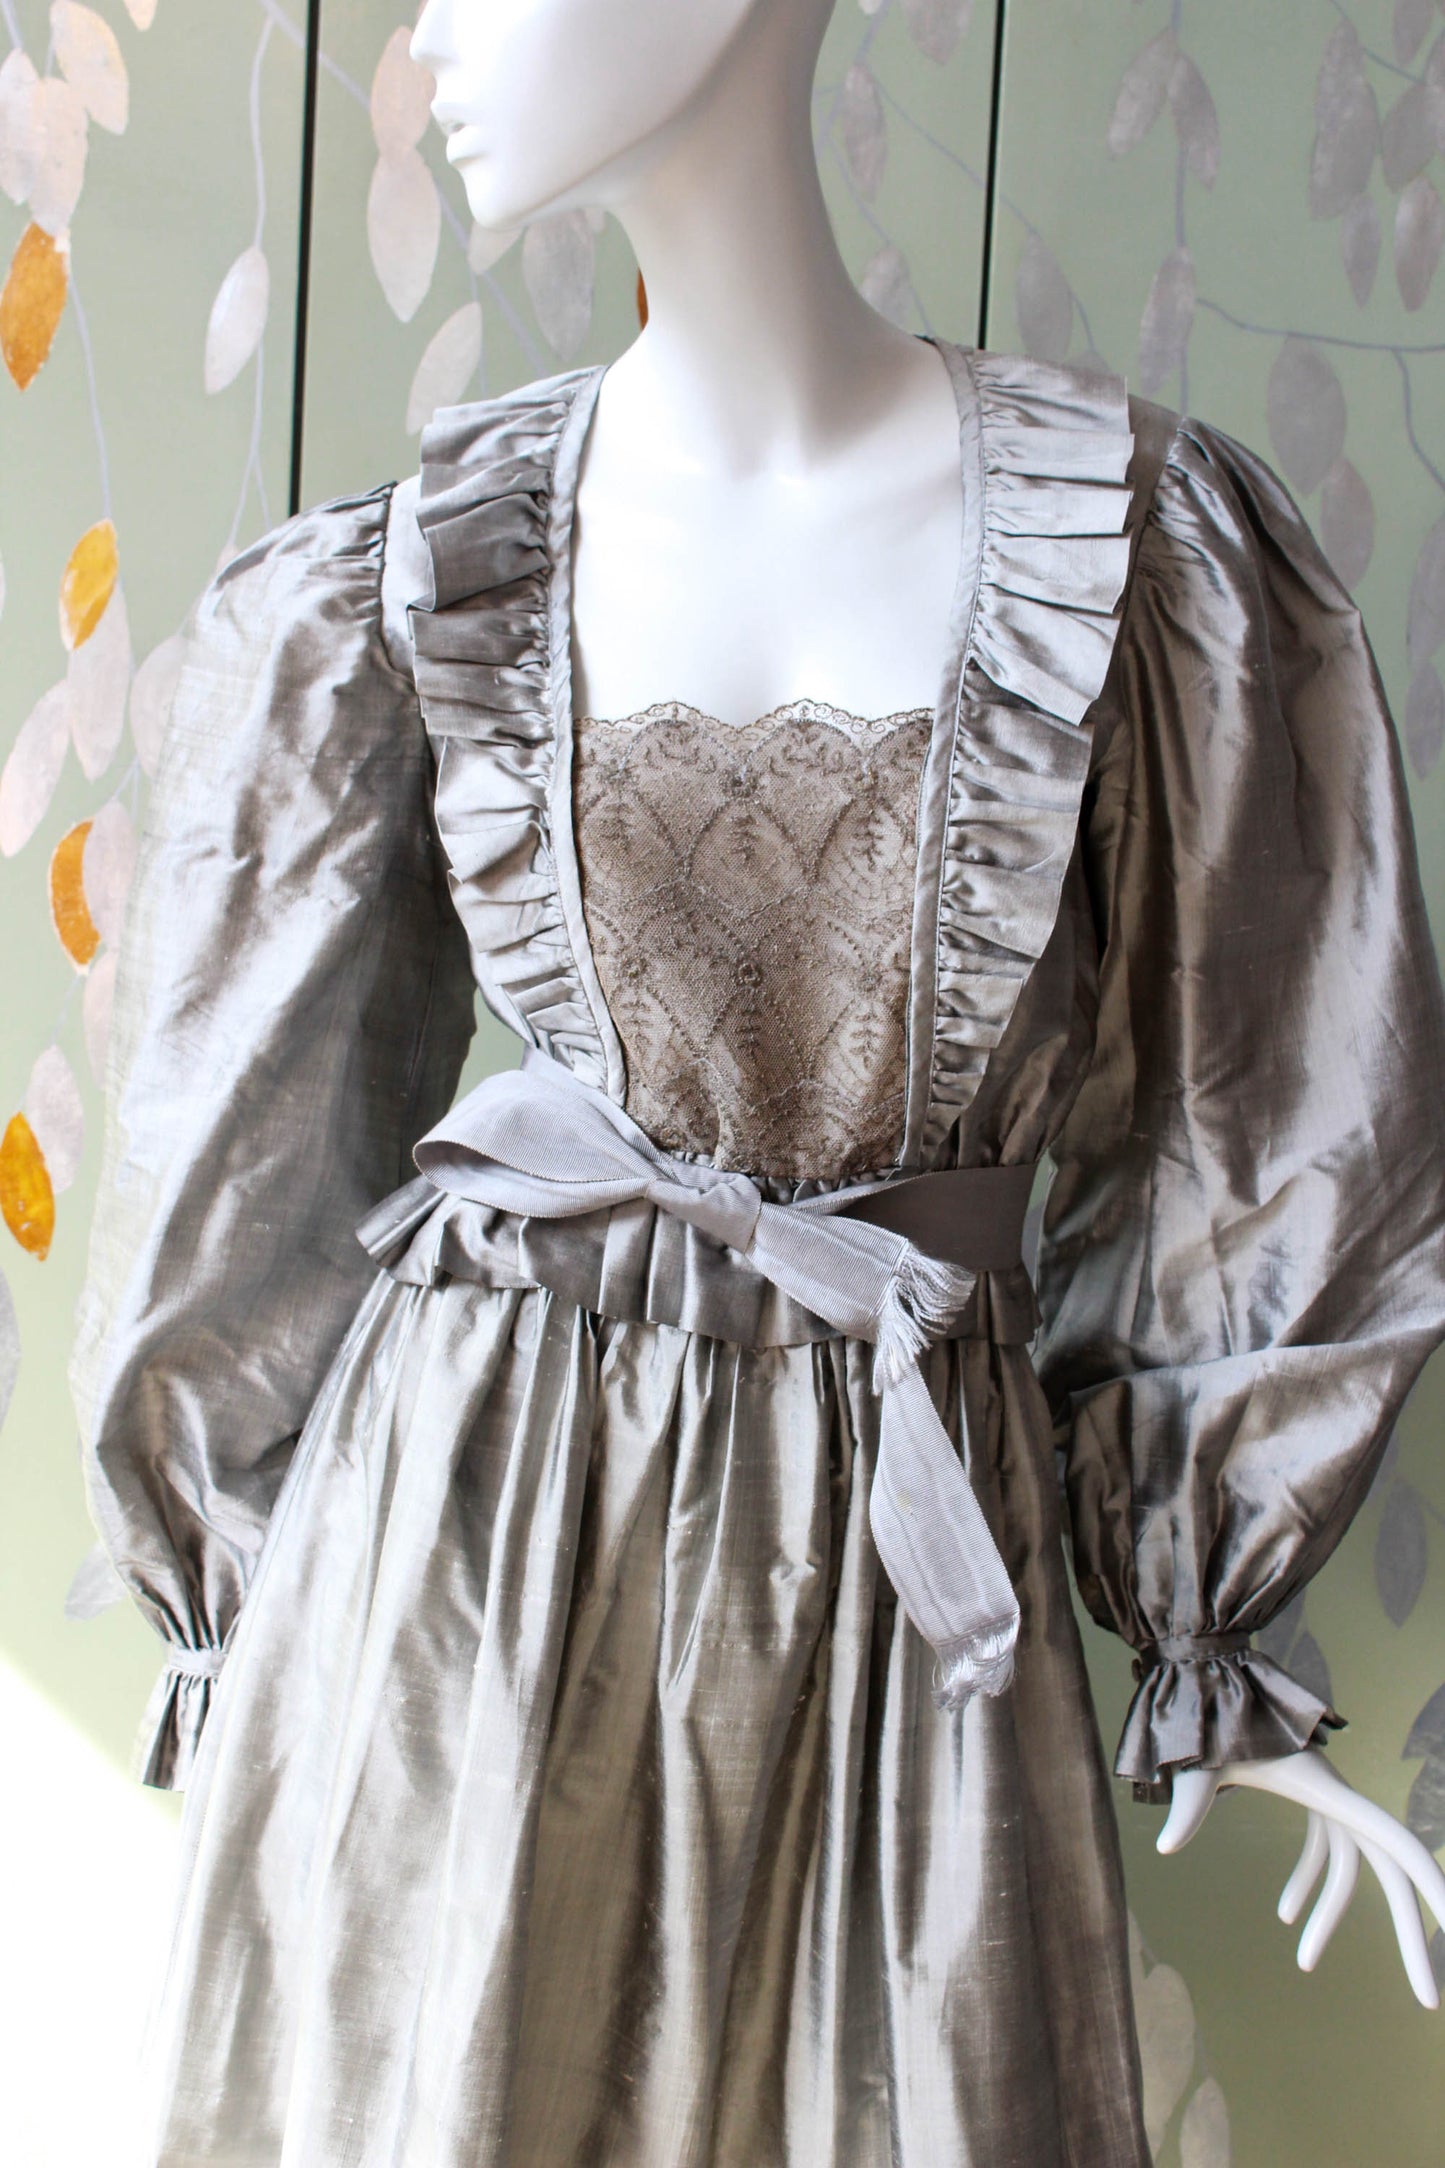 1980s pewter grey/shimmering silk blouse and skirt with ruffled detail on the front, lace panel overlay, corset style blouse with large puff sleeves and gathered full skirt with ruffle hem, maxi length.